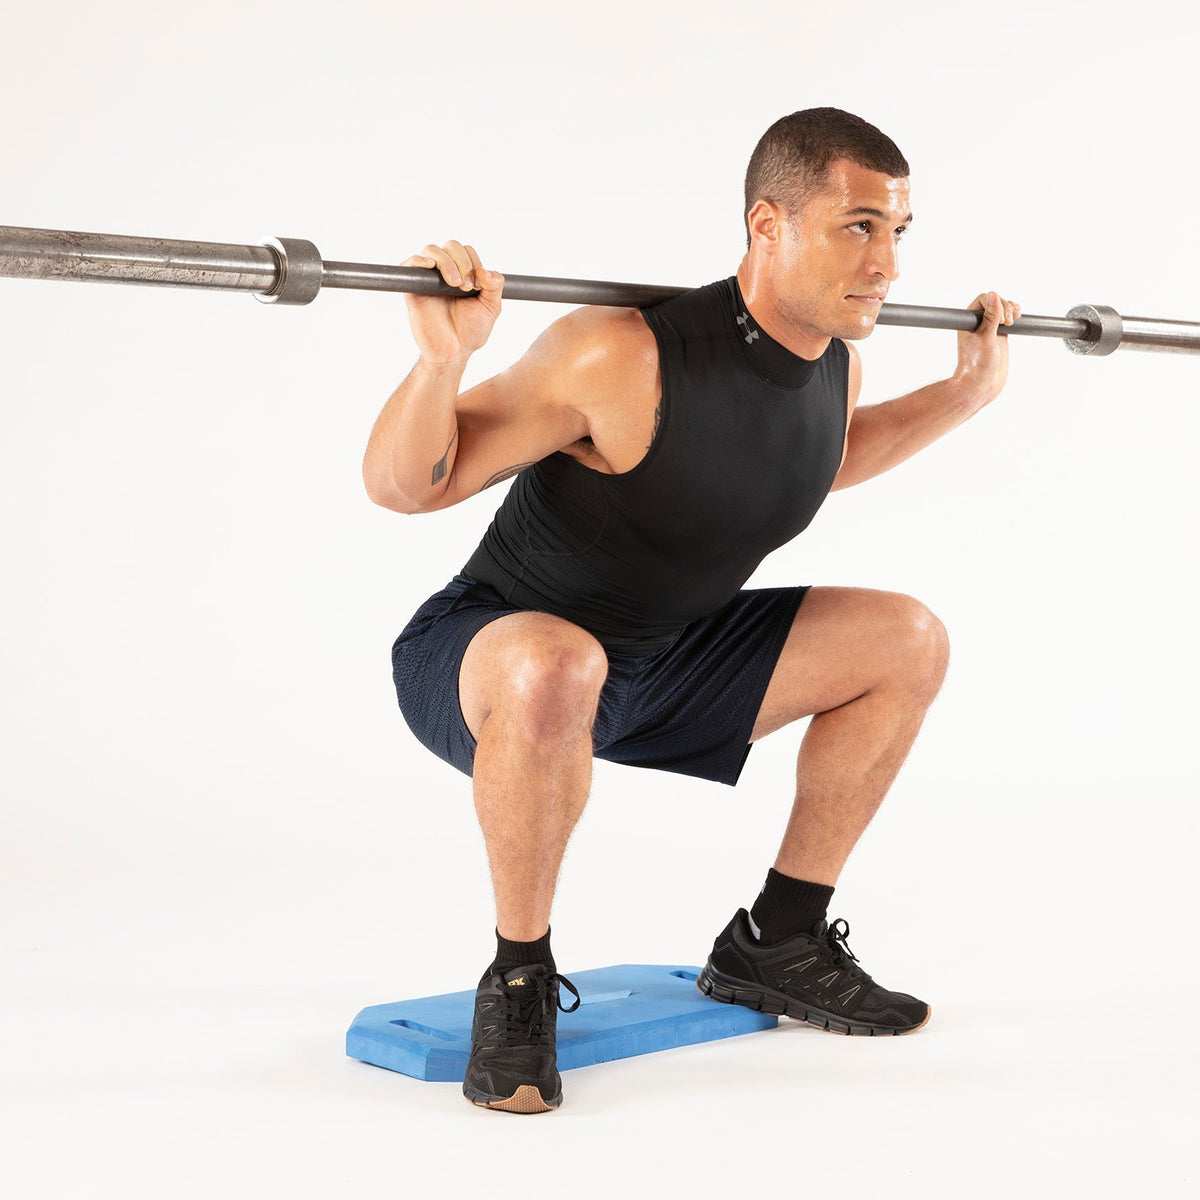 How to Mix Up the Barbell Back Squat